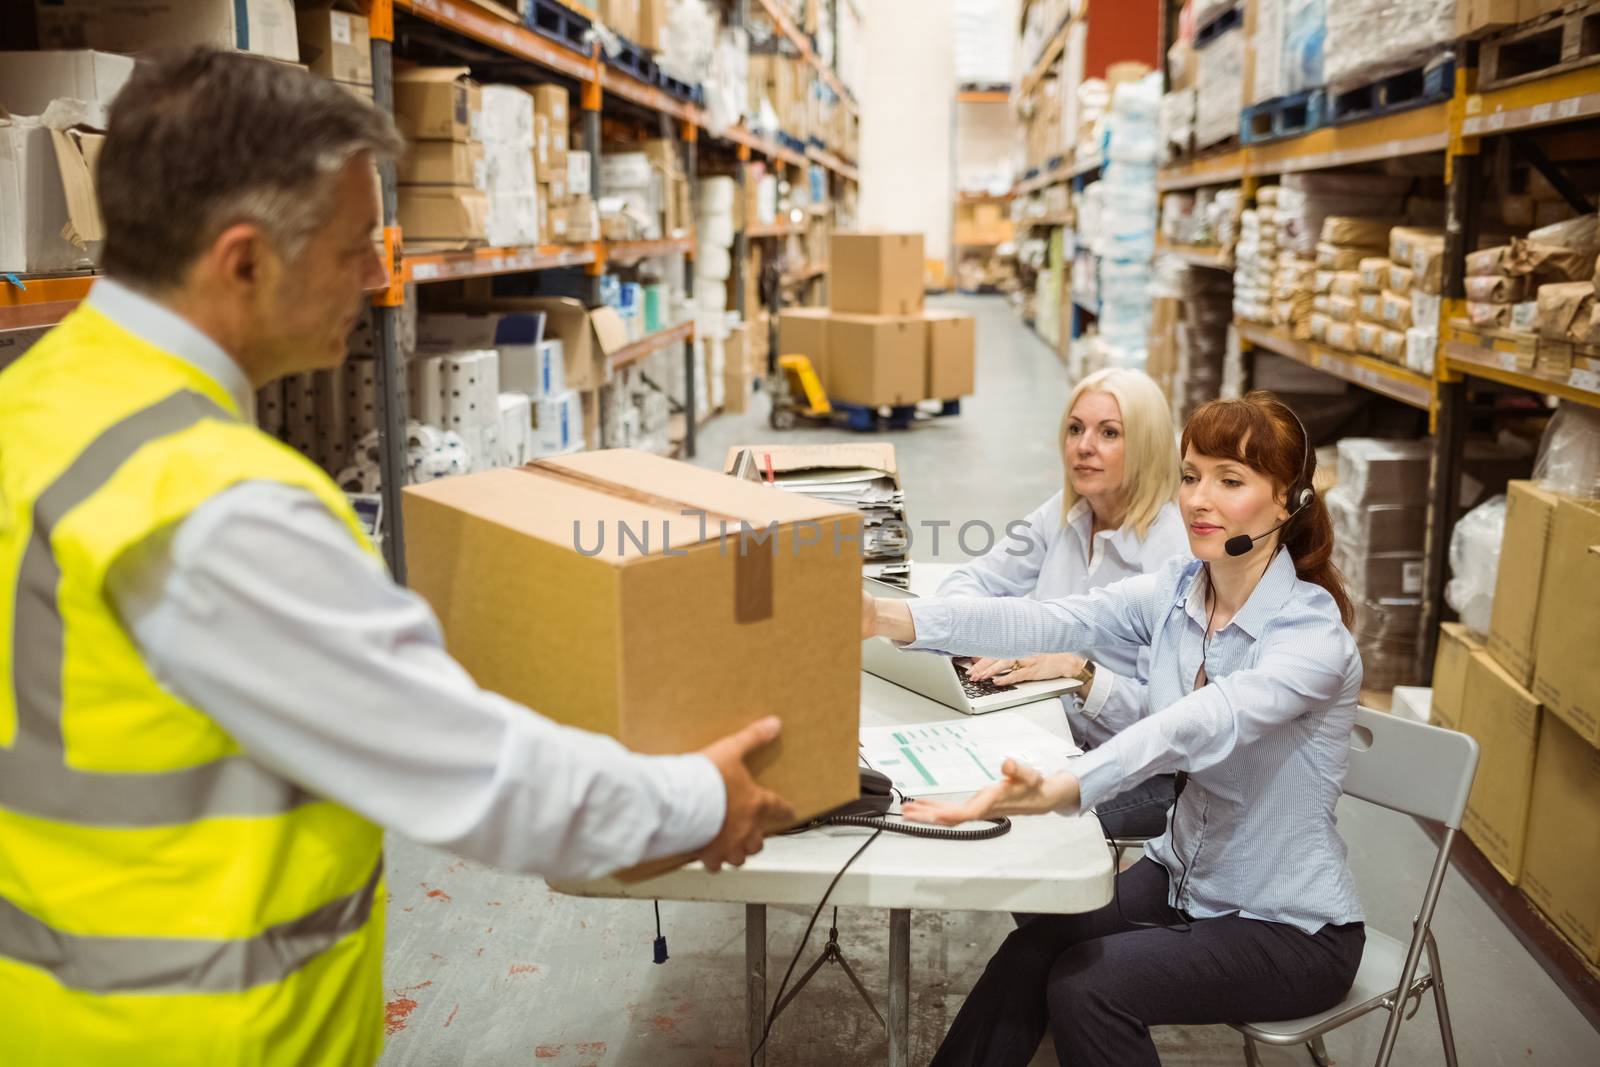 Manager wearing yellow vest giving box to his colleague in a large warehouse